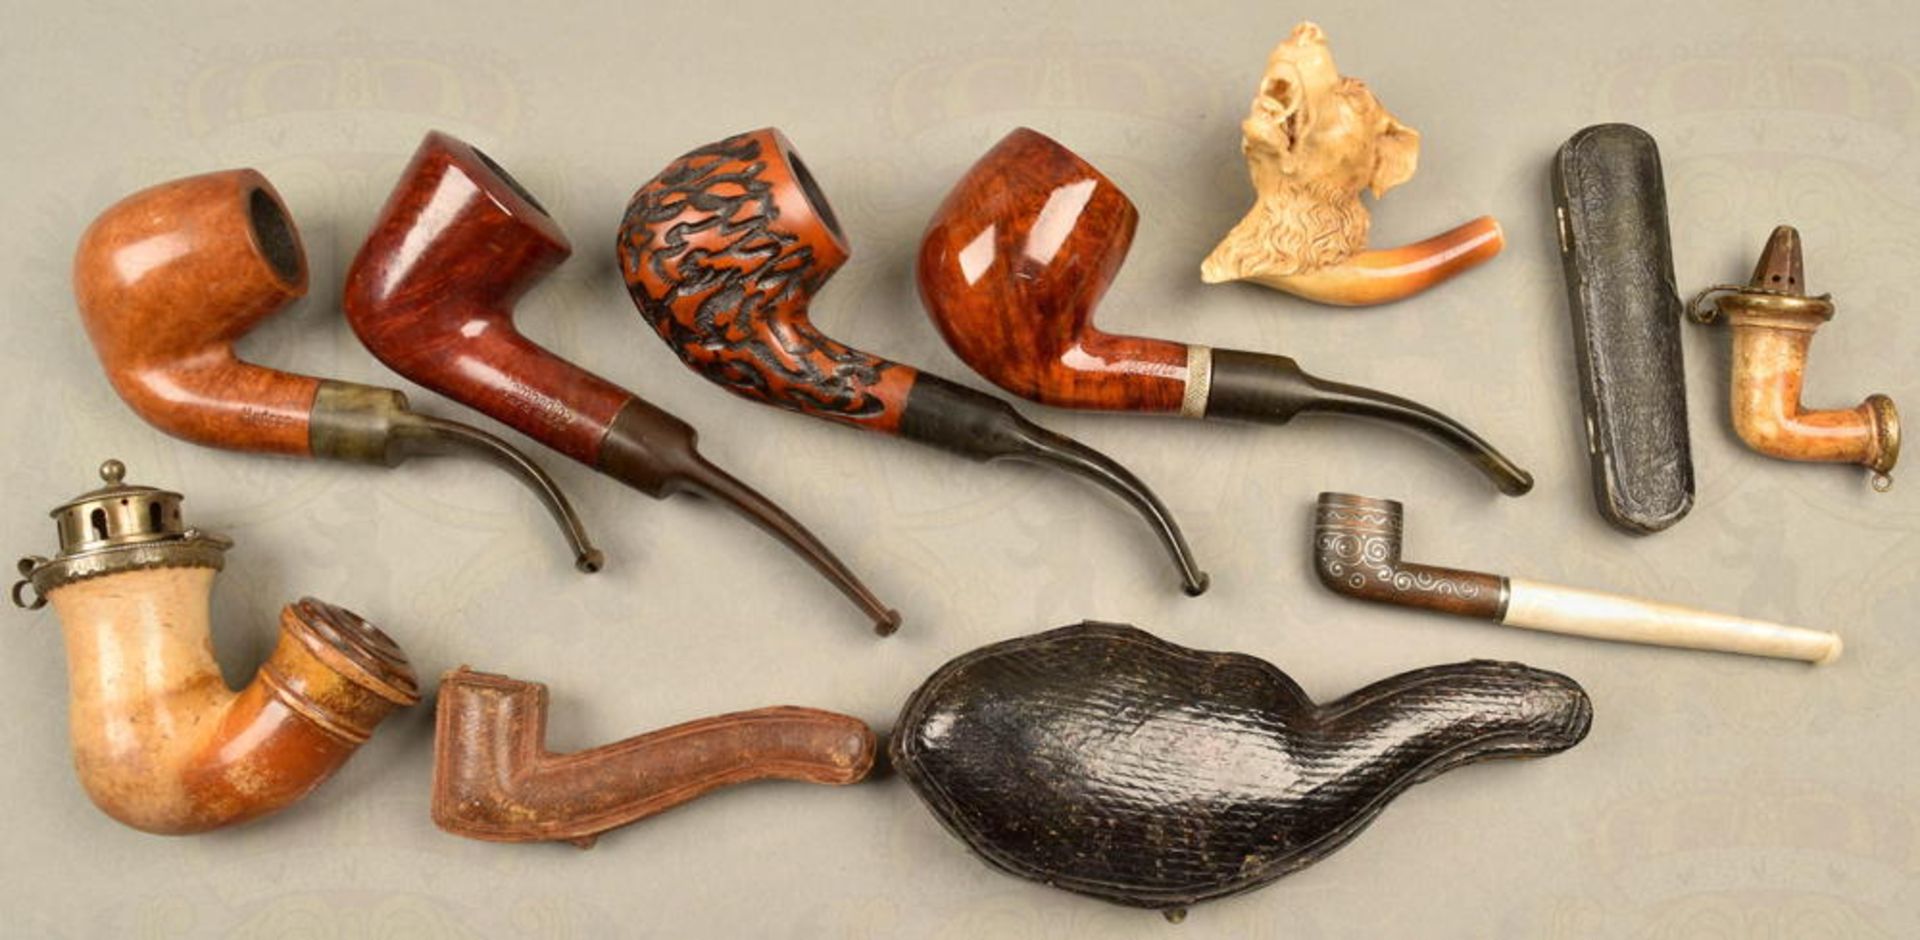 10 tobacco pipes, pipe bowl and cigarette holders